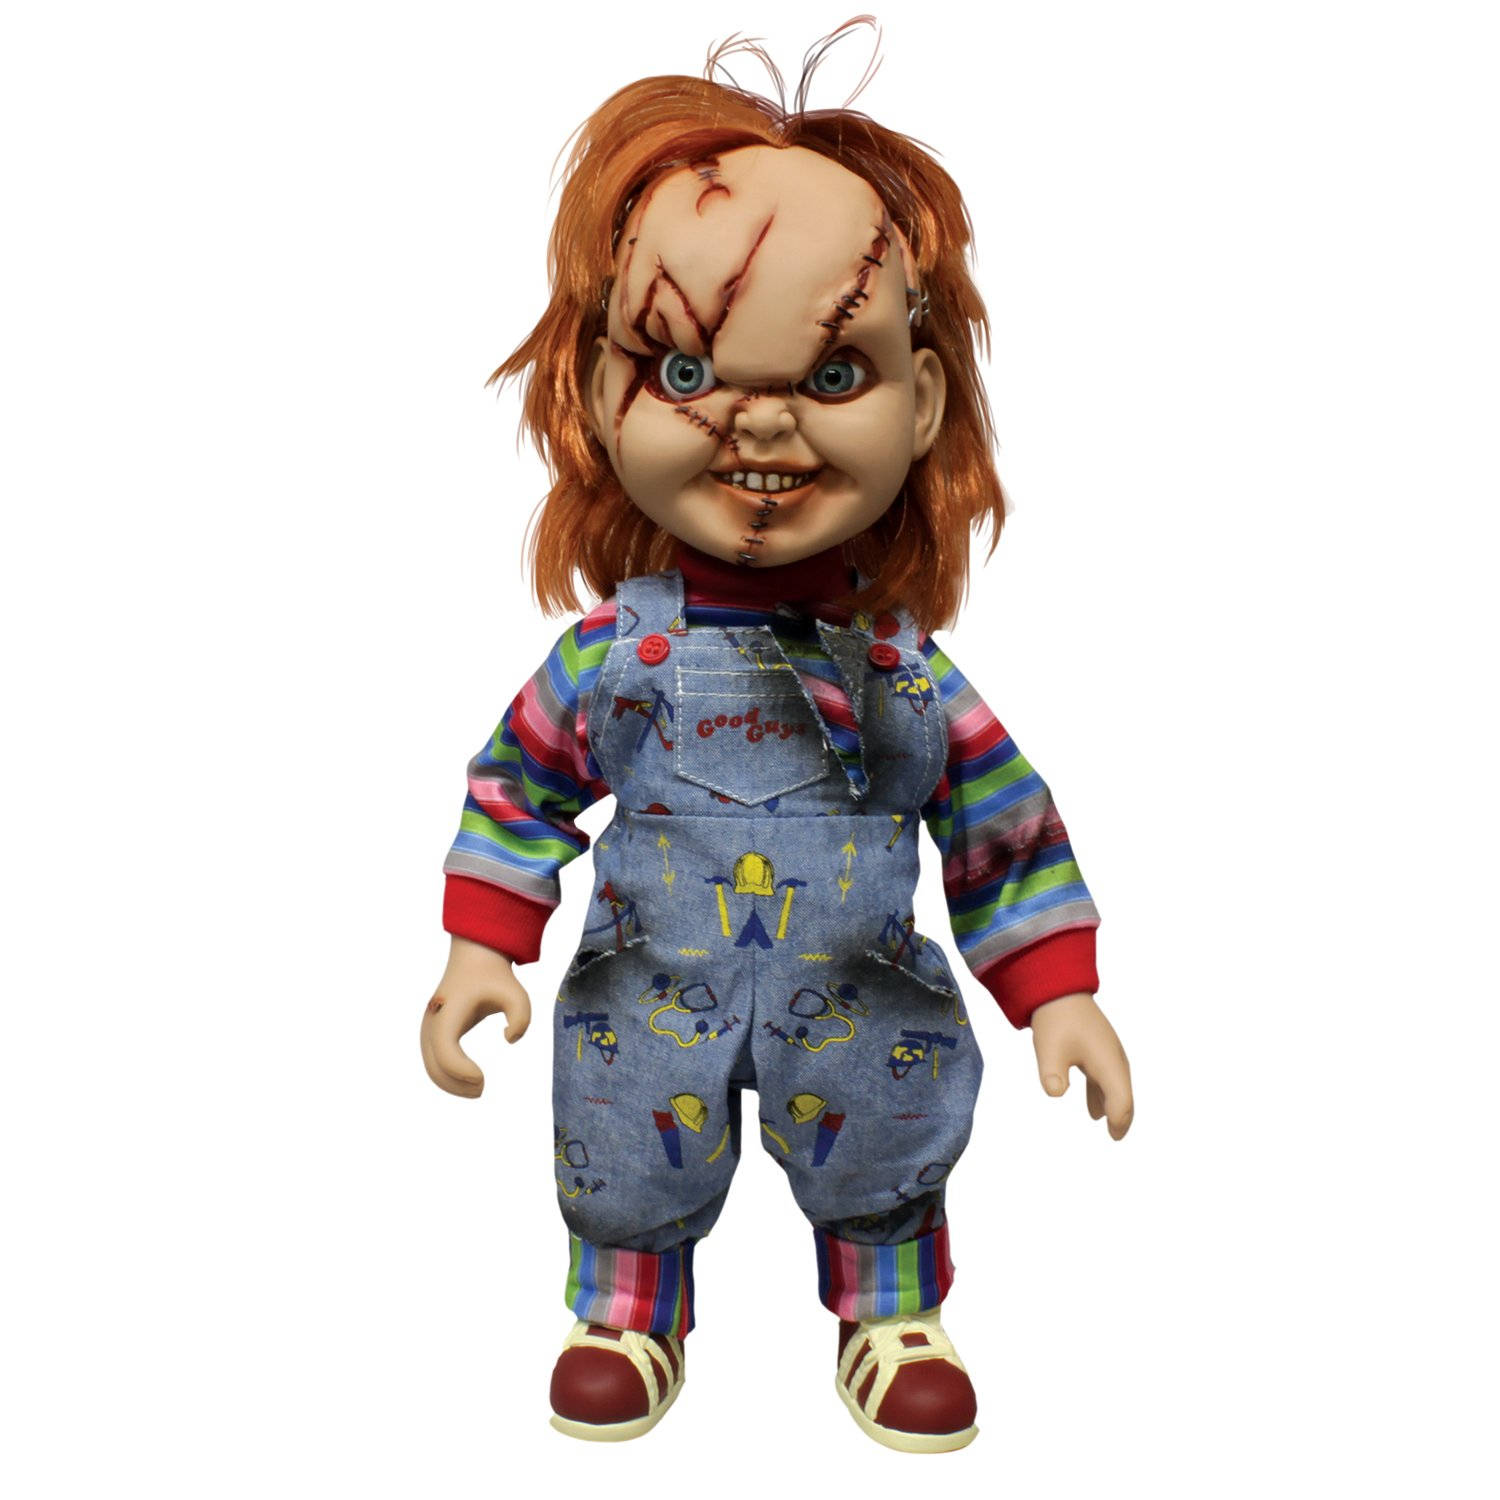 Chucky Doll Bad Guy With Scars Background